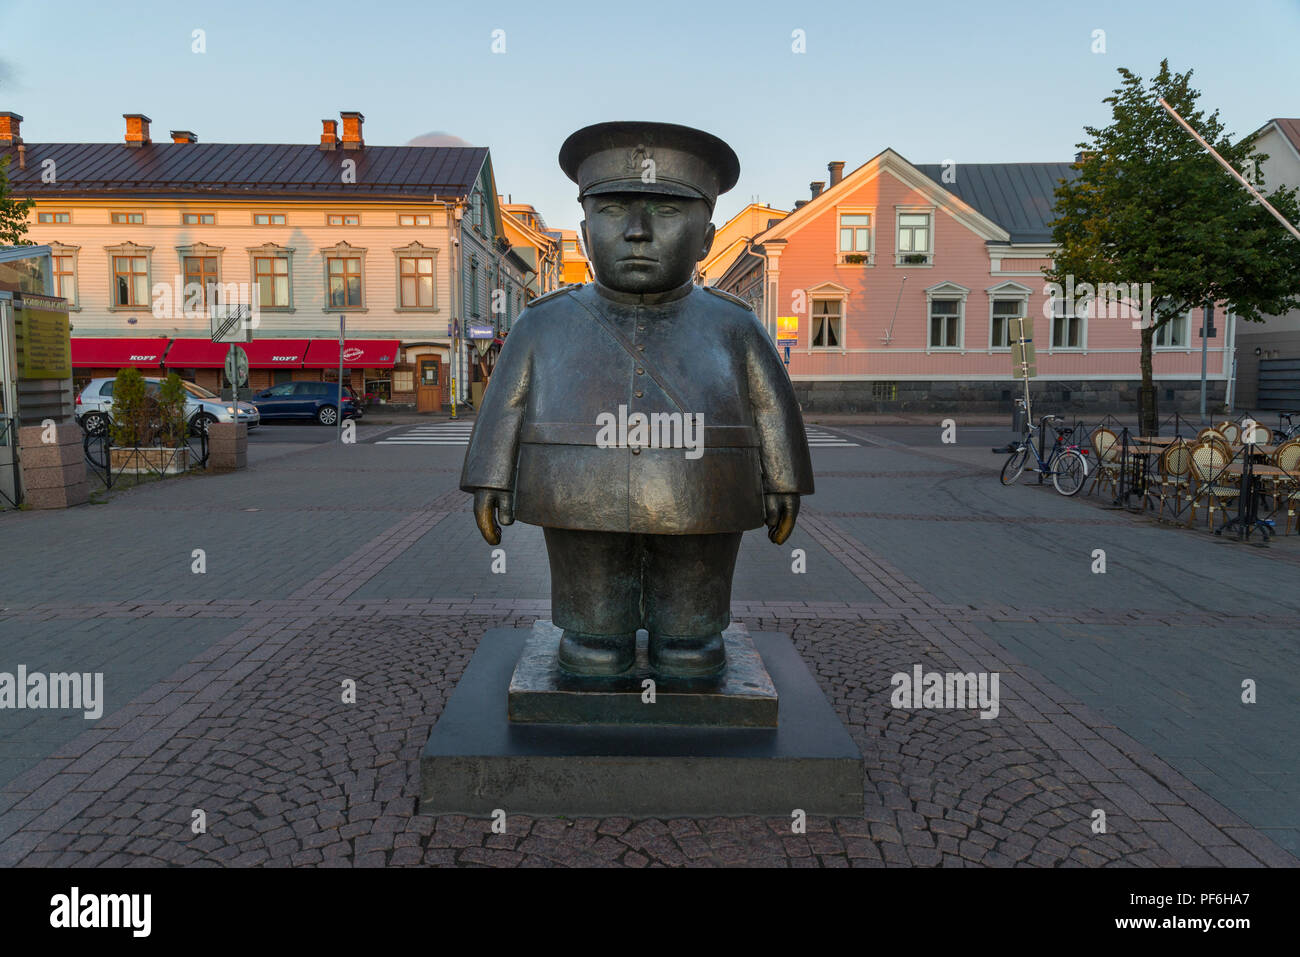 The Bobby at the Market Place (Toripoliisi), Oulu, Finland Stock Photo